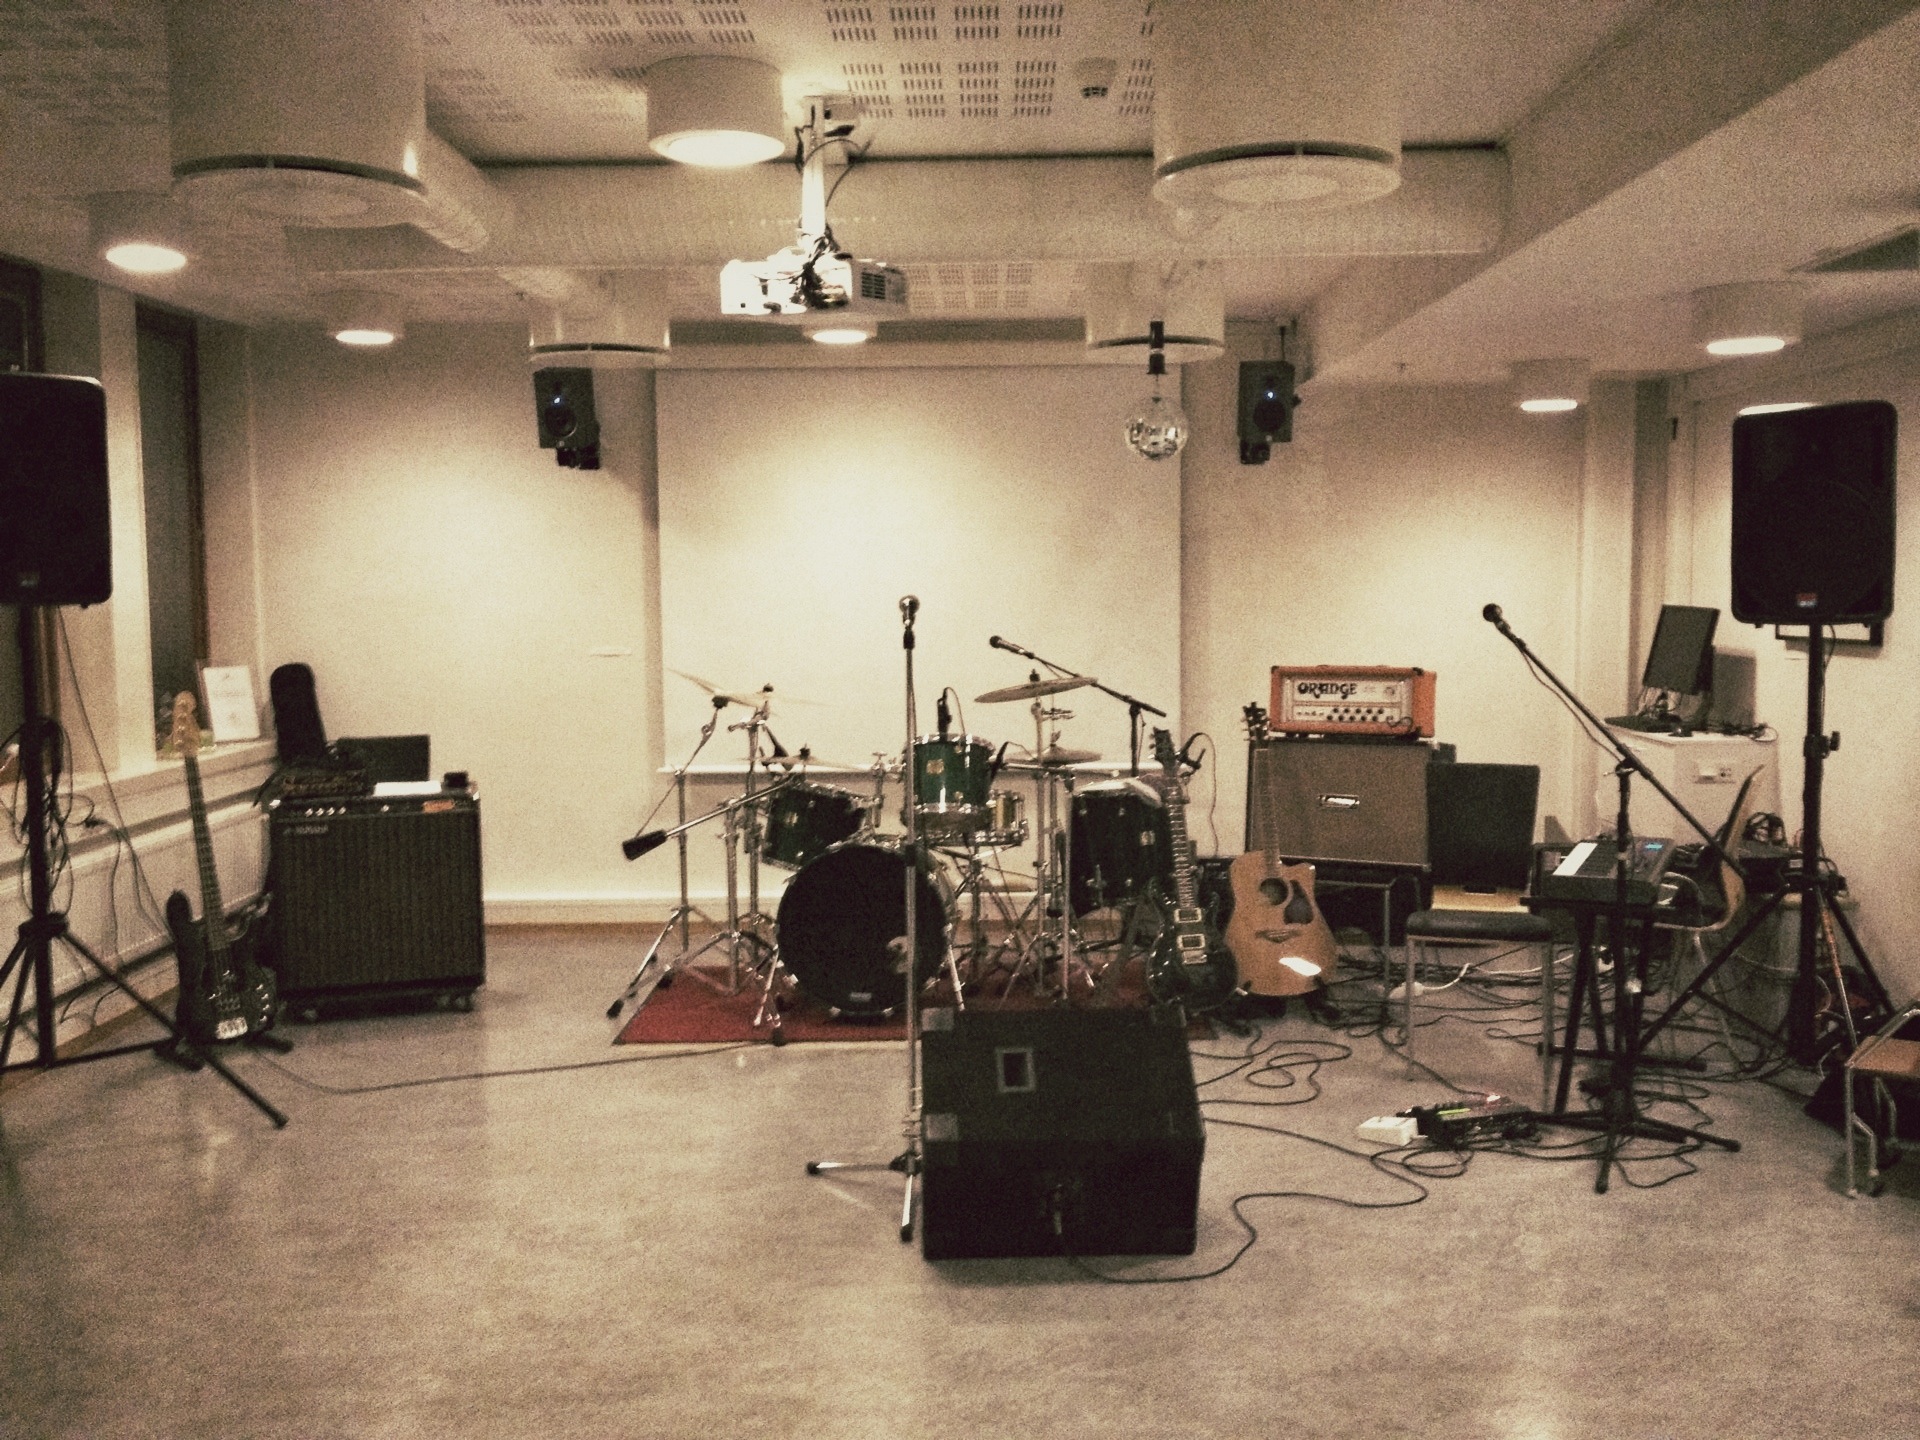 the empty, studio is a place with a lot of musical instruments and sound equipment